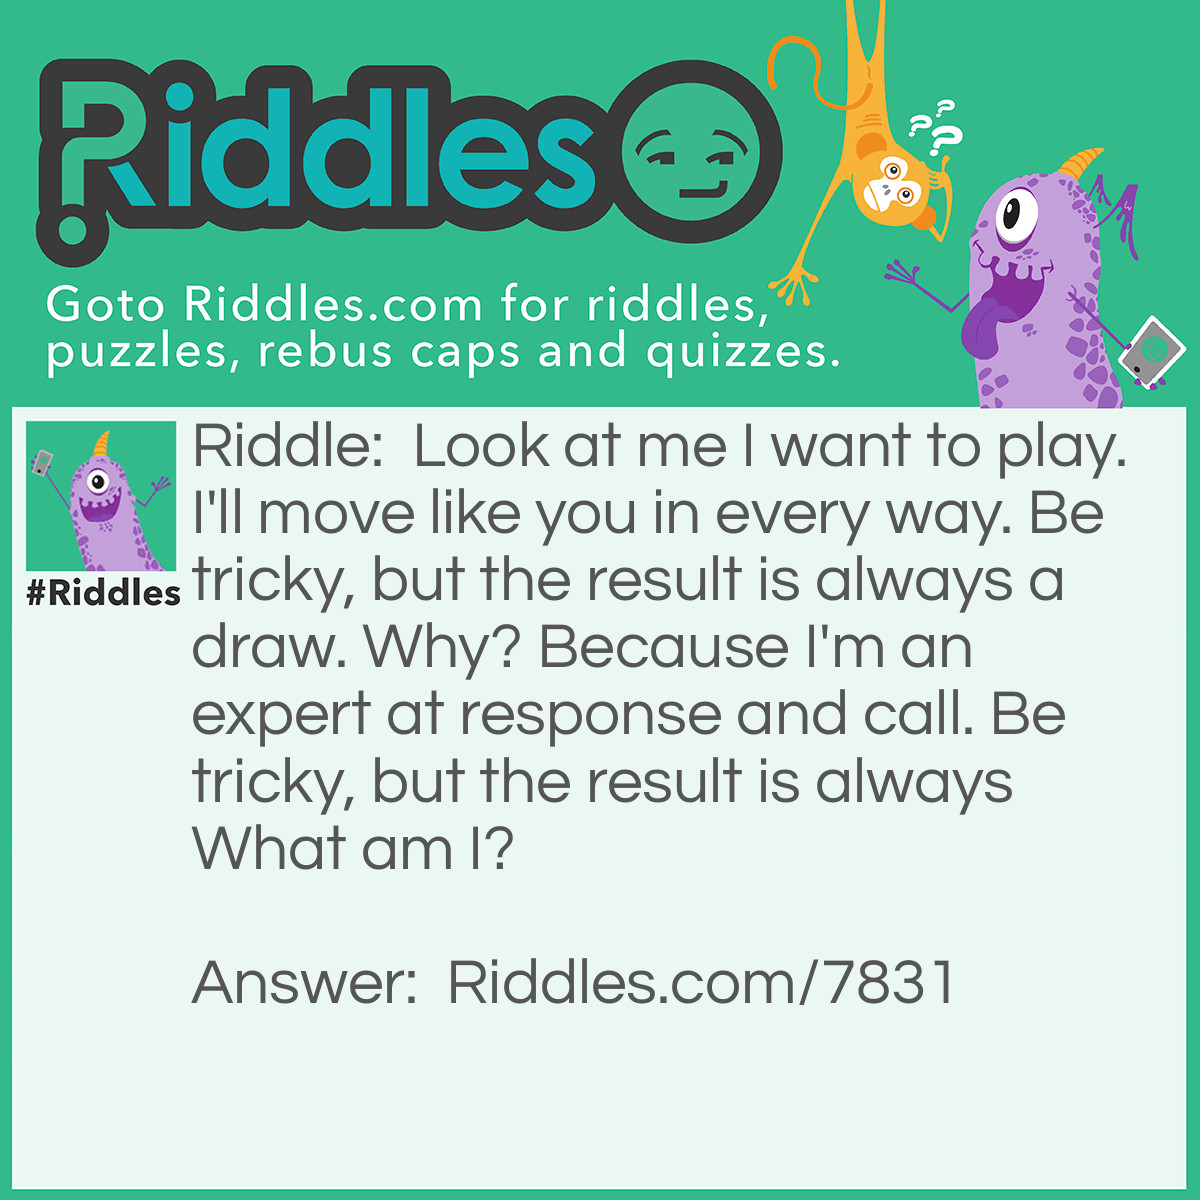 Riddle: Look at me I want to play. I'll move like you in every way. Be tricky, but the result is always a draw. Why? Because I'm an expert at response and call. Be tricky, but the result is always What am I? Answer: Your Reflection!